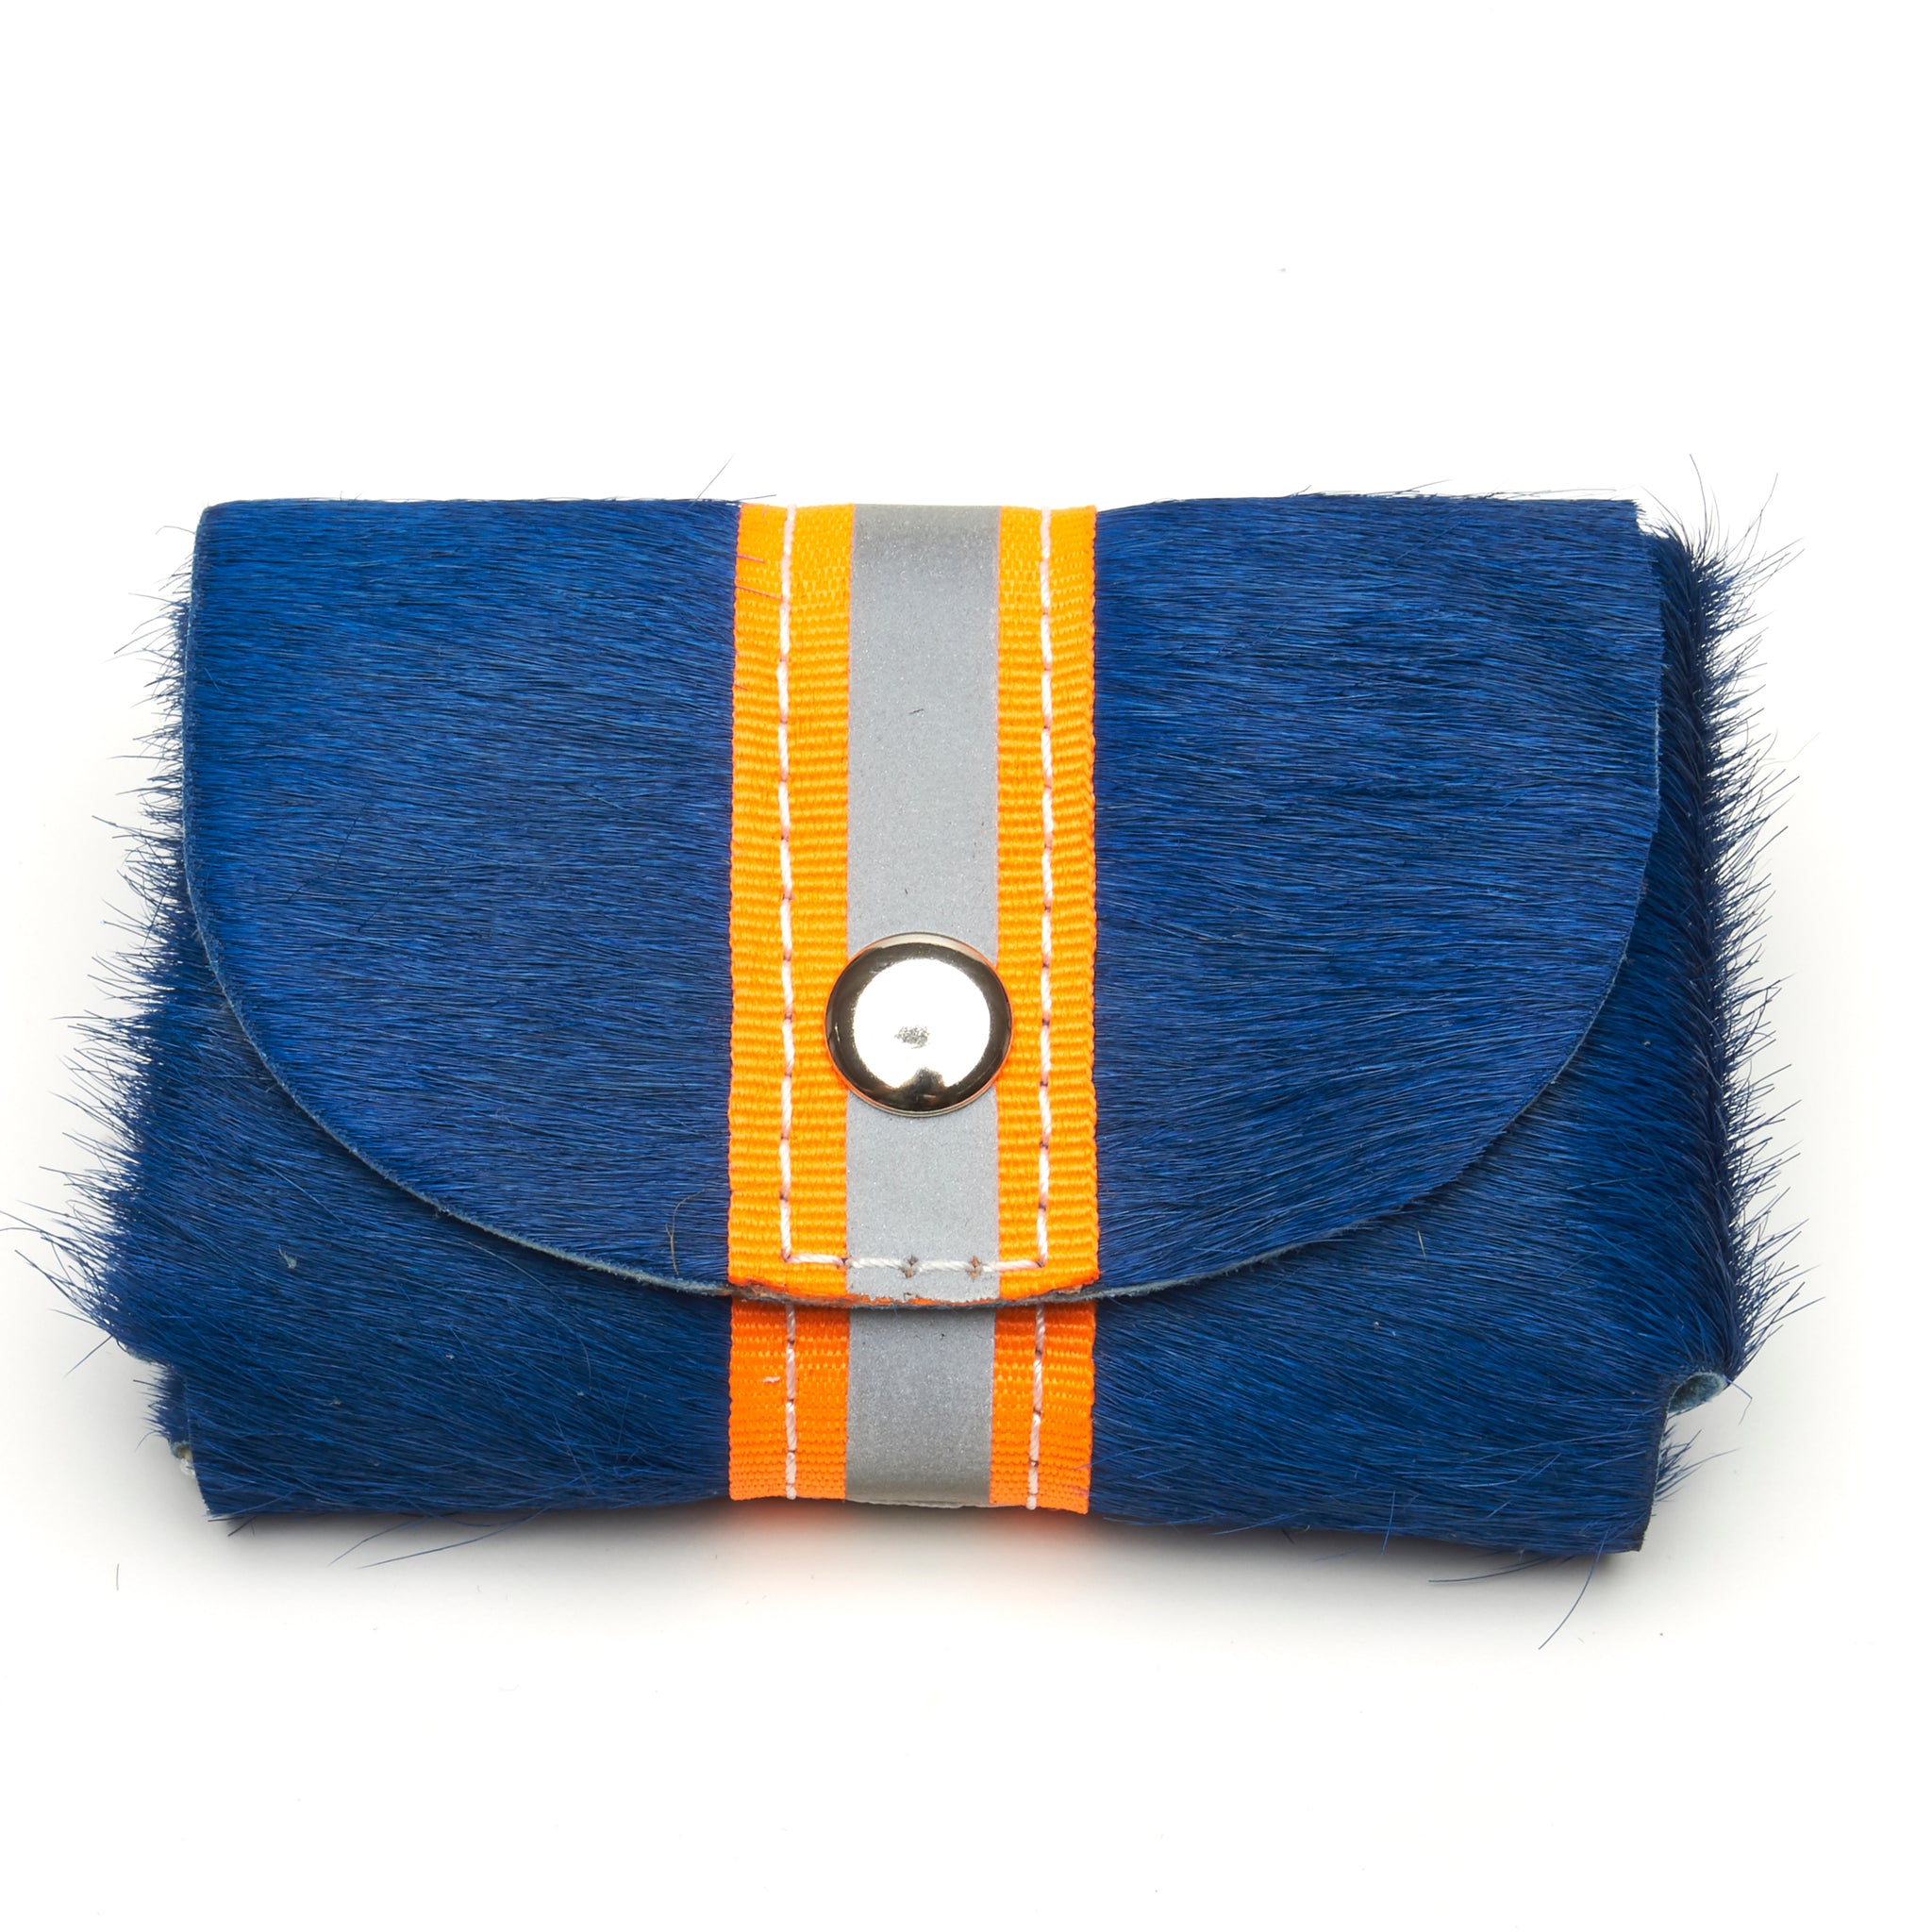 COBALT BLUE HAIR-ON COWHIDE 2-COMPARTMENT WALLET WITH SNAP CLOSURE. By NYET Jewelry.